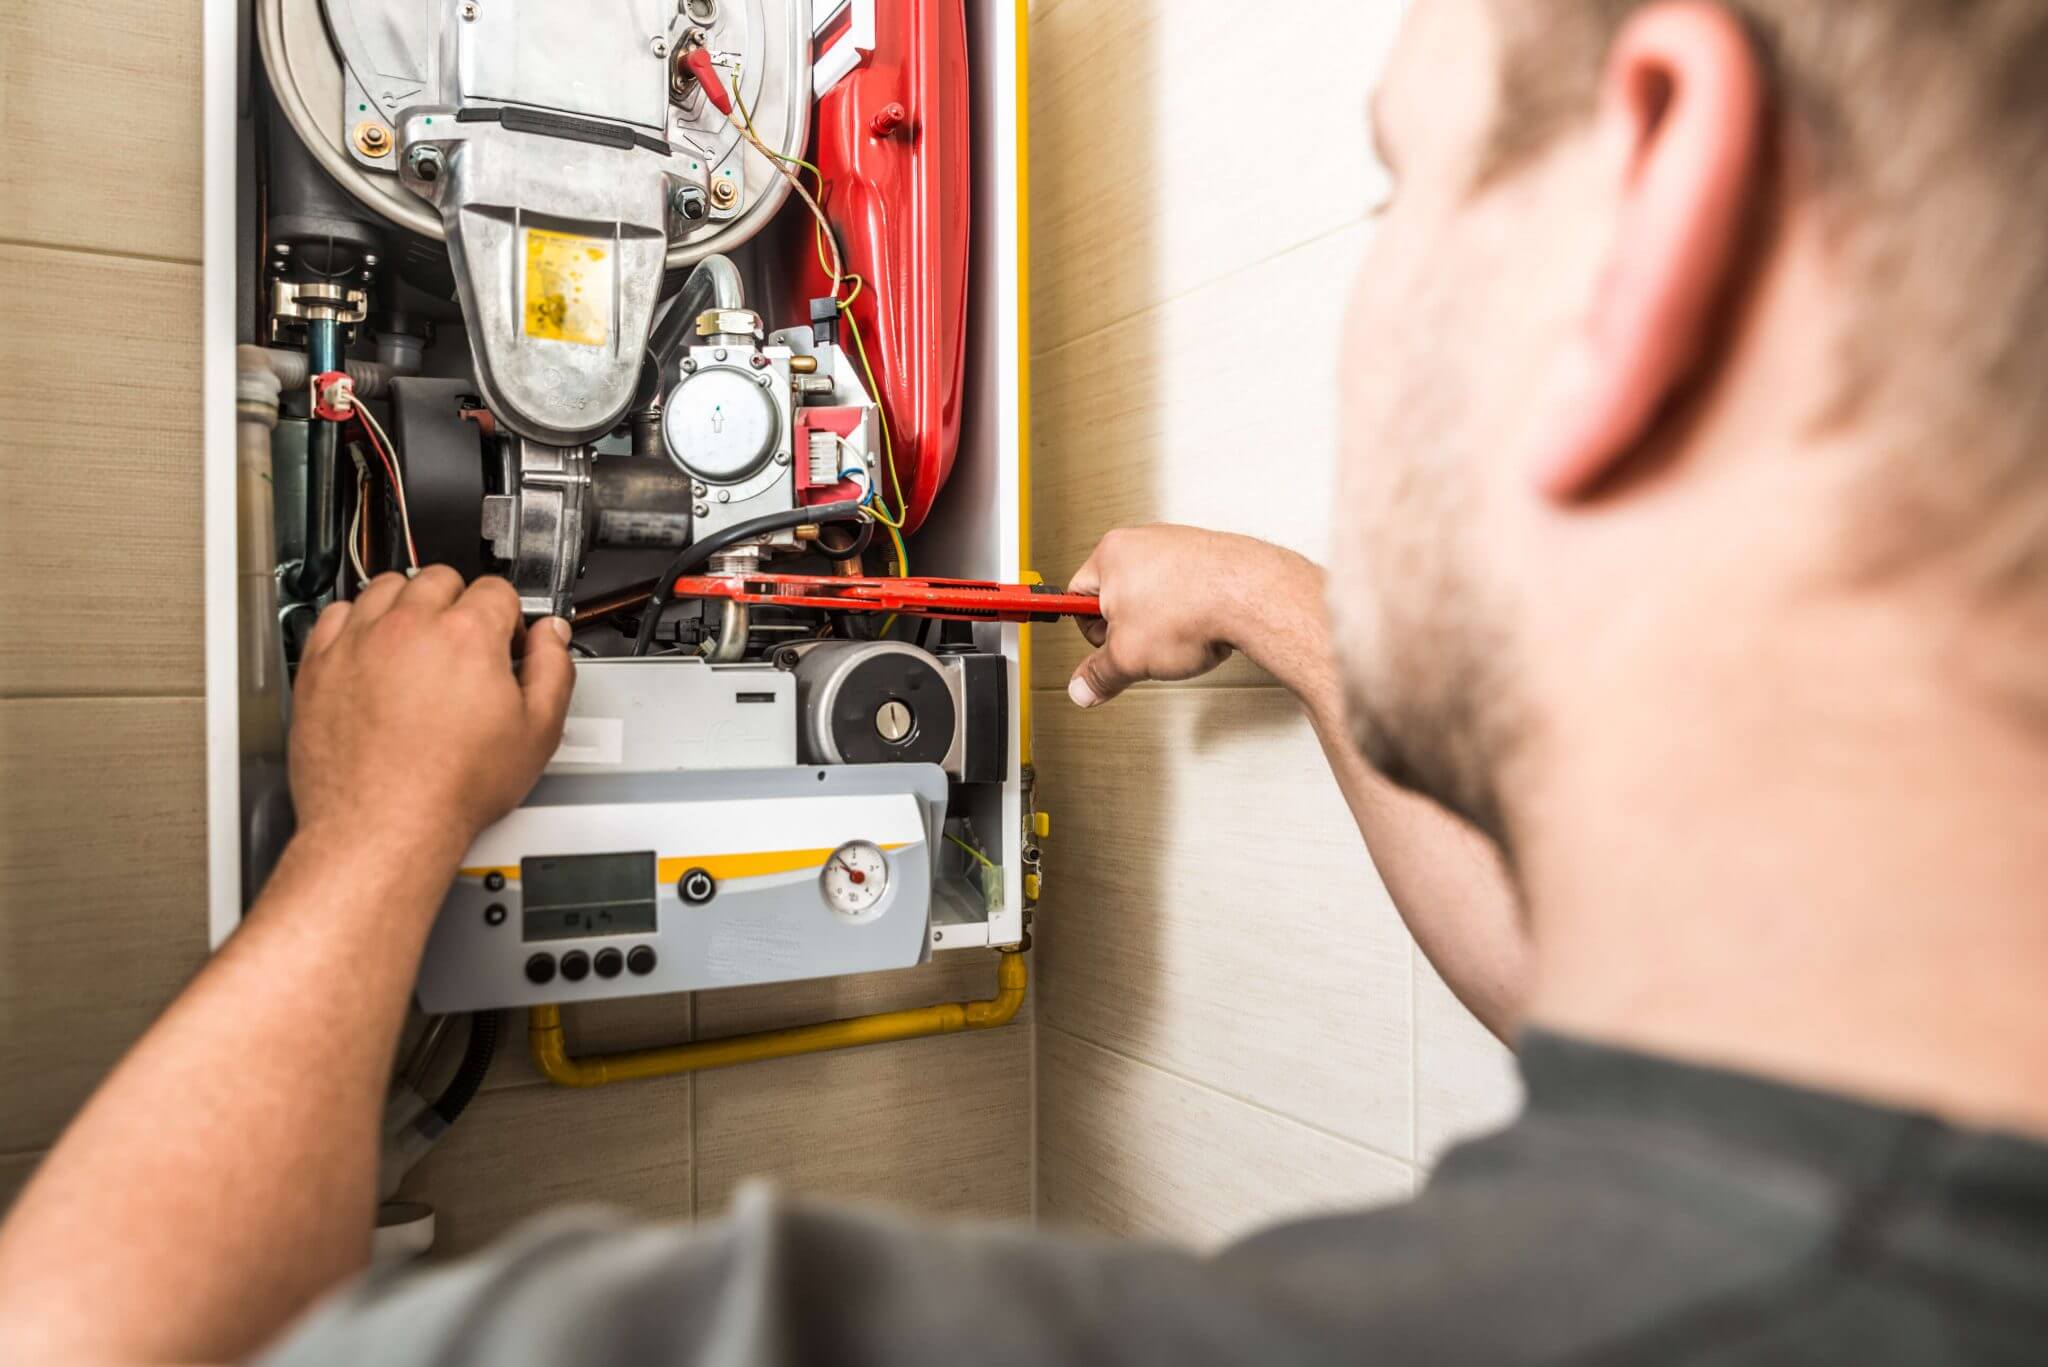 water heater replacement services